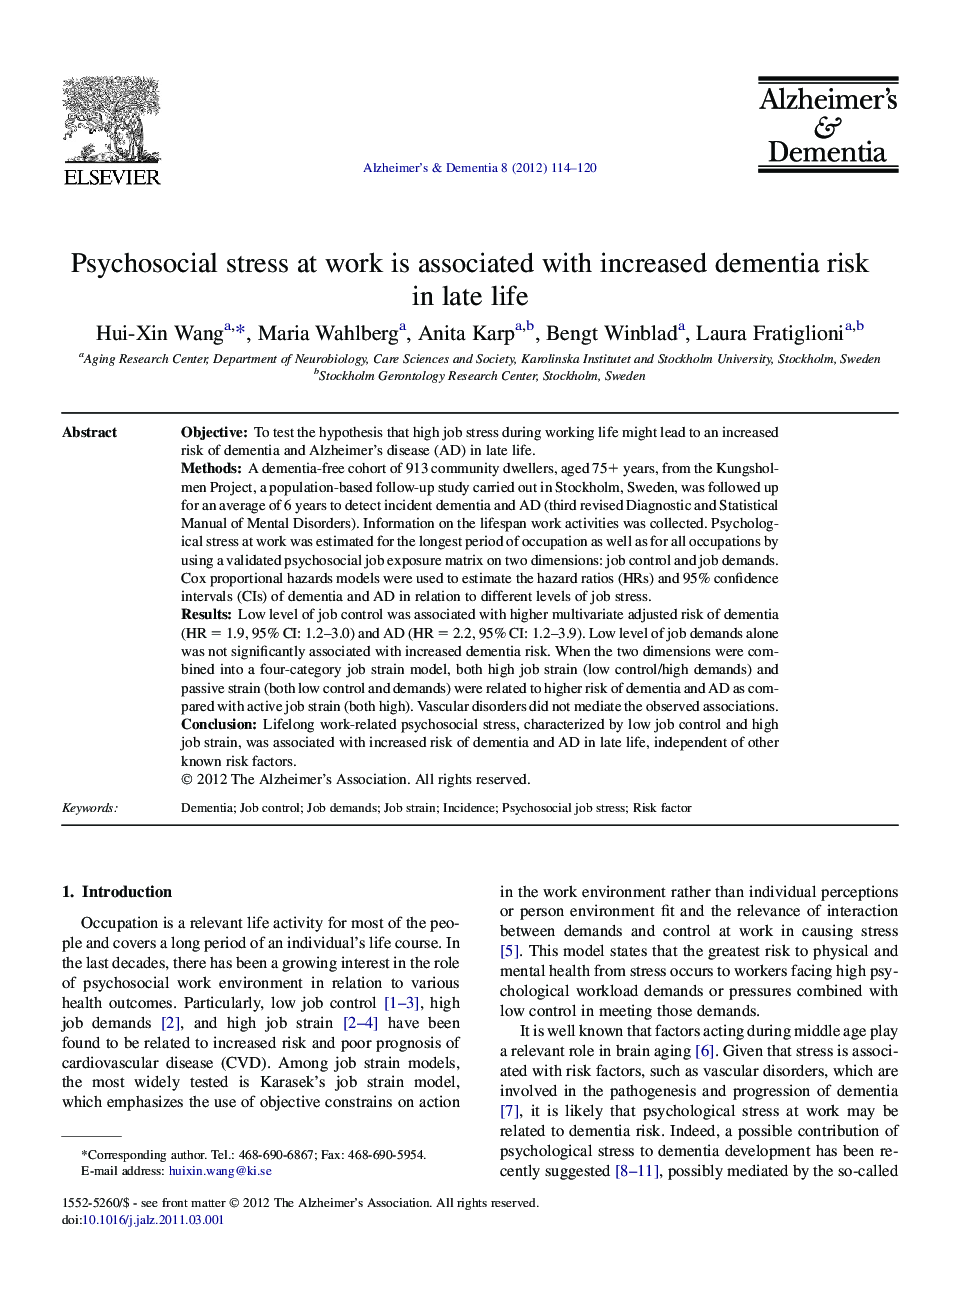 Featured ArticlePsychosocial stress at work is associated with increased dementia risk in late life